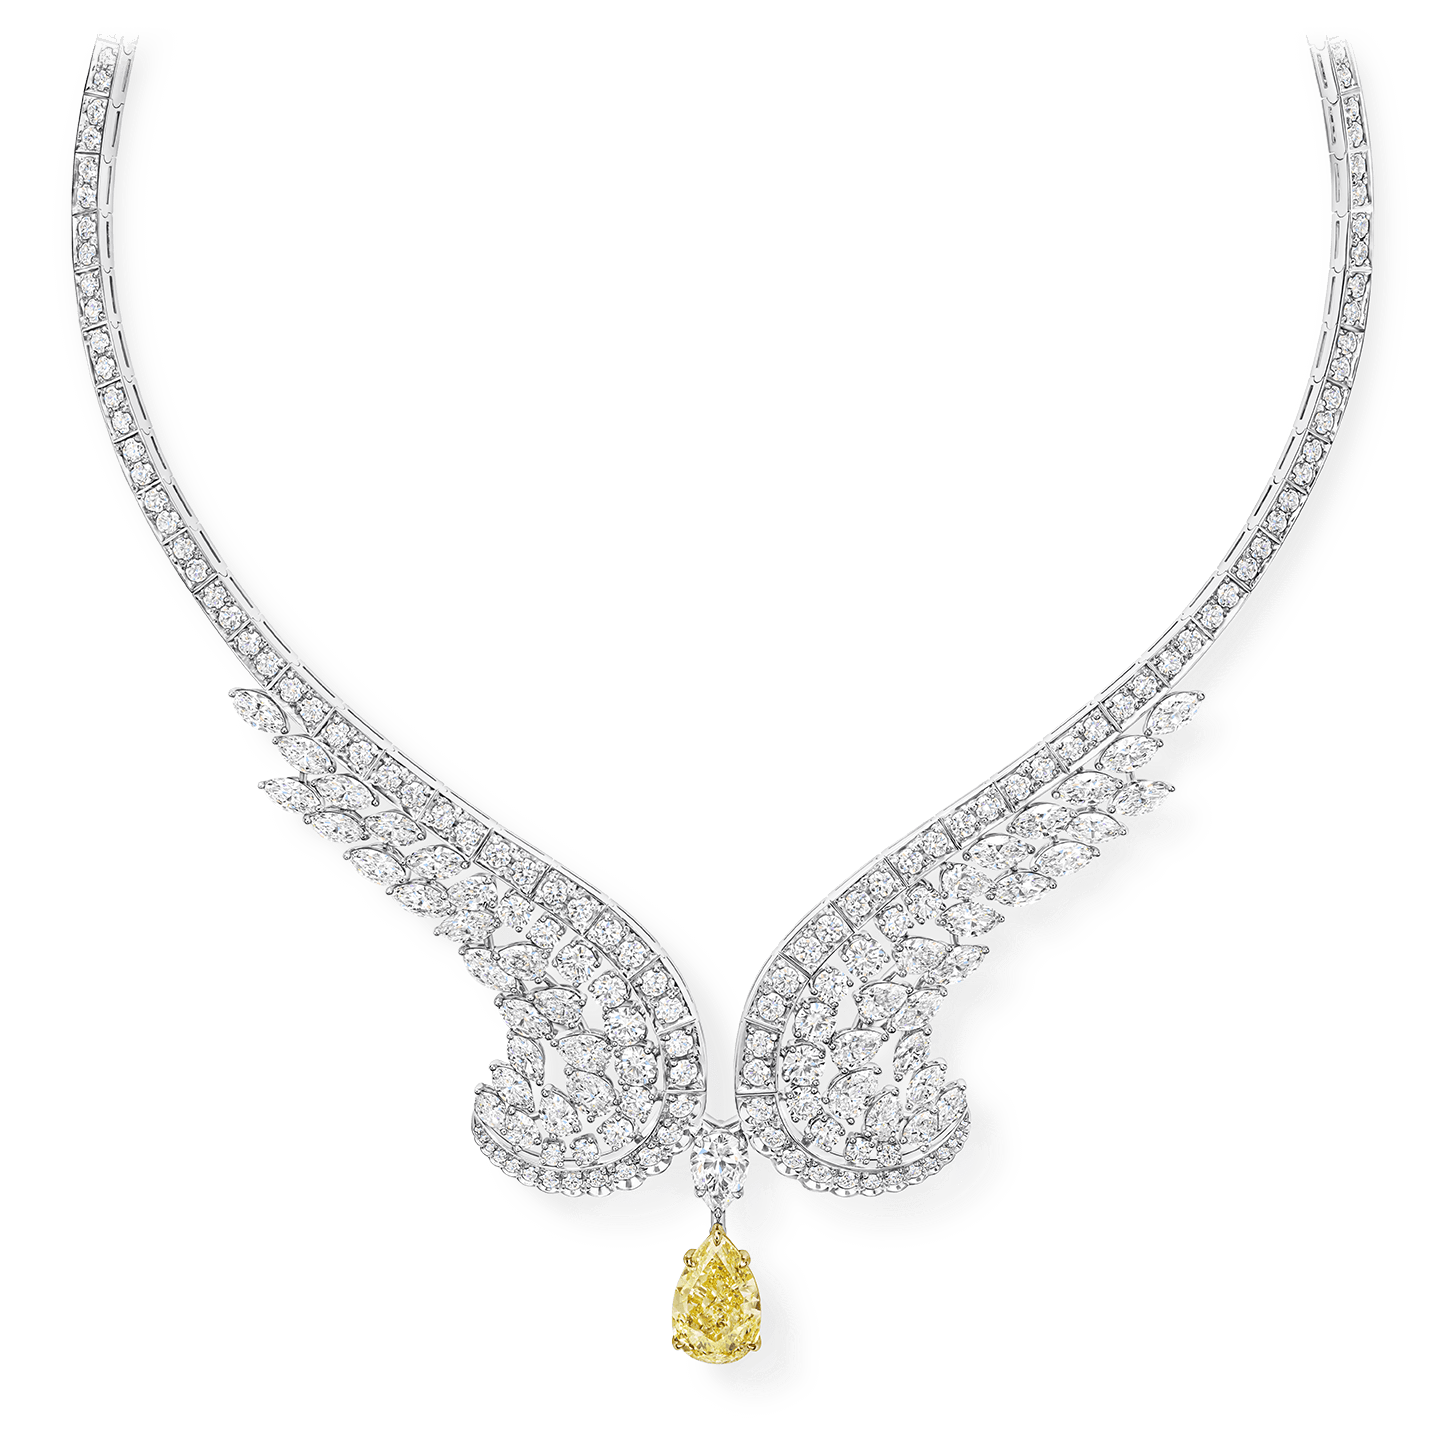 A necklace featuring a 5.87 carat pear-shaped fancy yellow diamond center stone with 250 pear-shaped, marquise and round brilliant diamonds set in platinum and 18 karat yellow gold